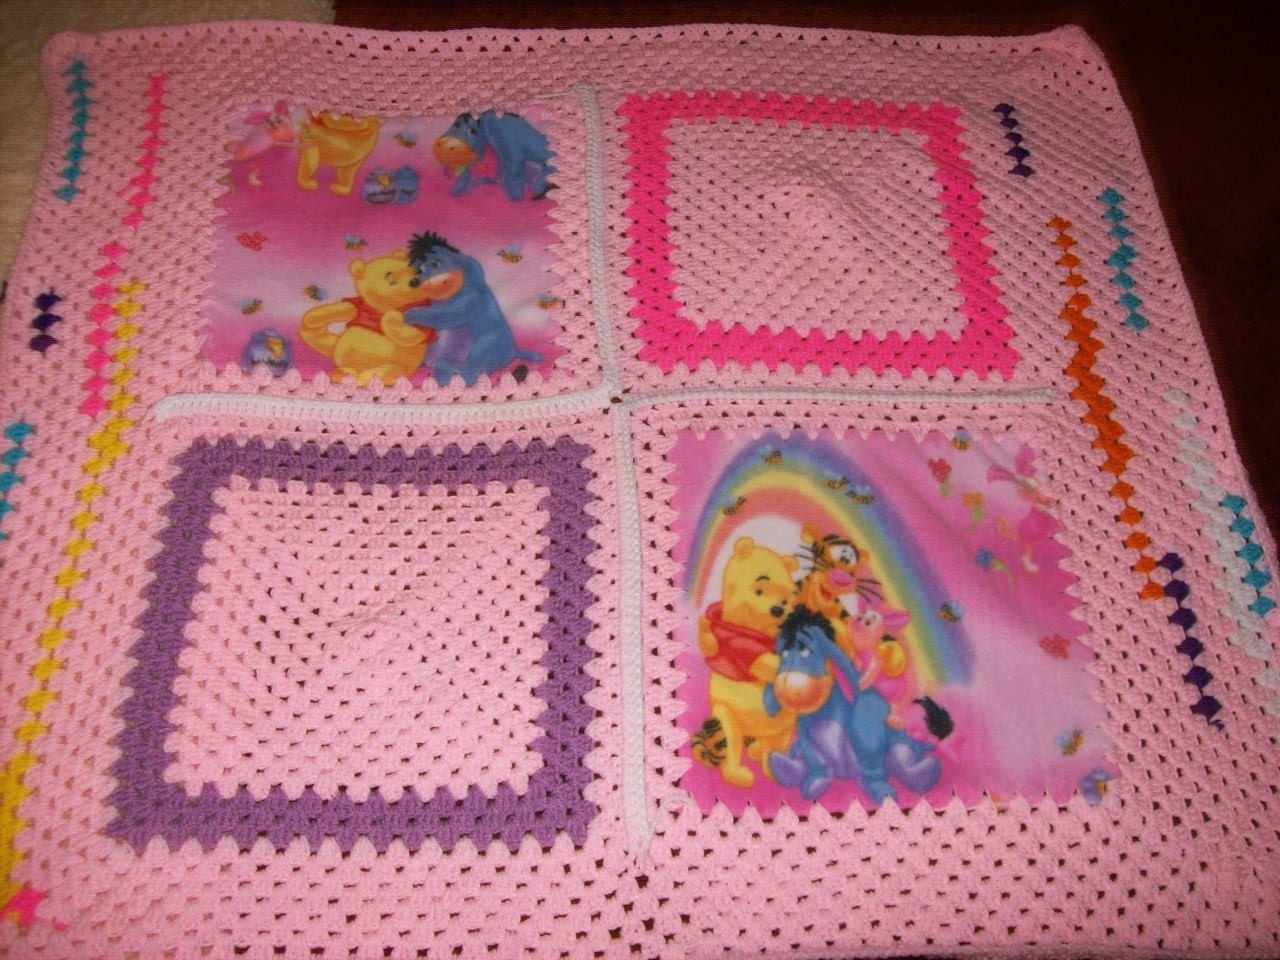 Crochet Collection: Crocheting Edges on Baby Blankets